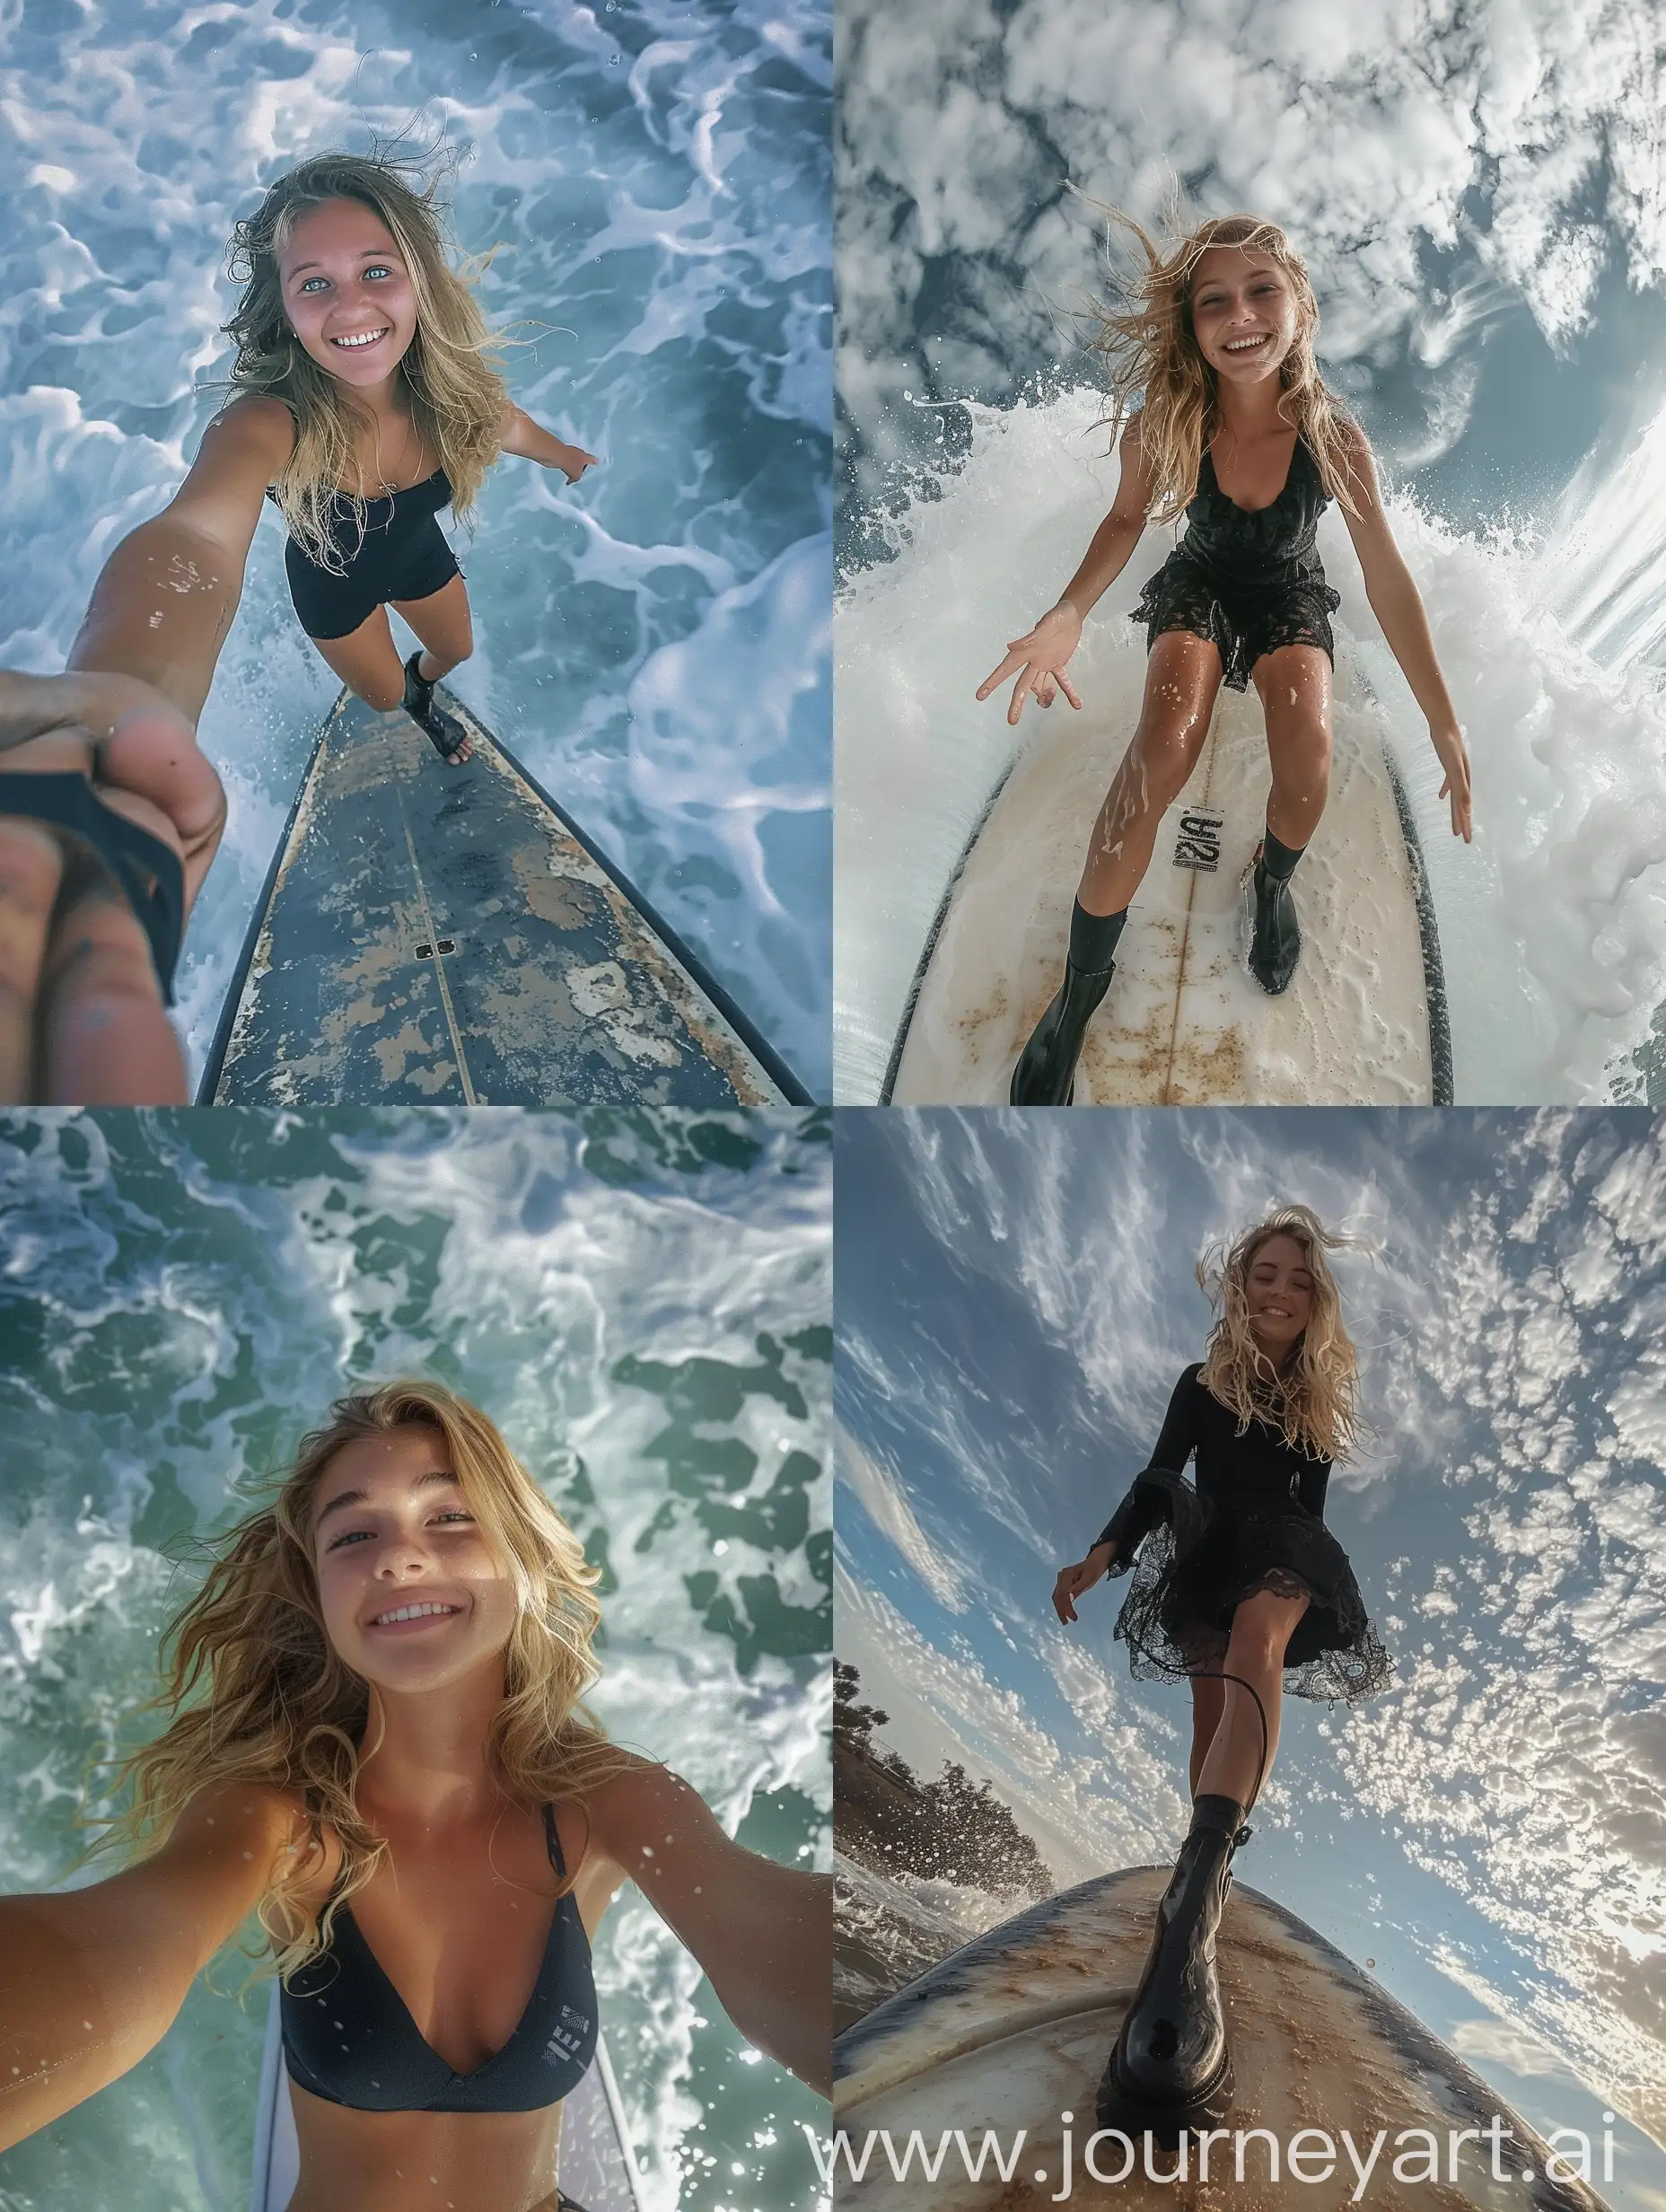 a girl, 22 years old, blonde hair, black dress, black boots, smiling, surfing, standing on a surfboard, no effects, selfie , iphone selfie, 
no filters, natural , iphone photo natural, camera down angle, sky view, down view